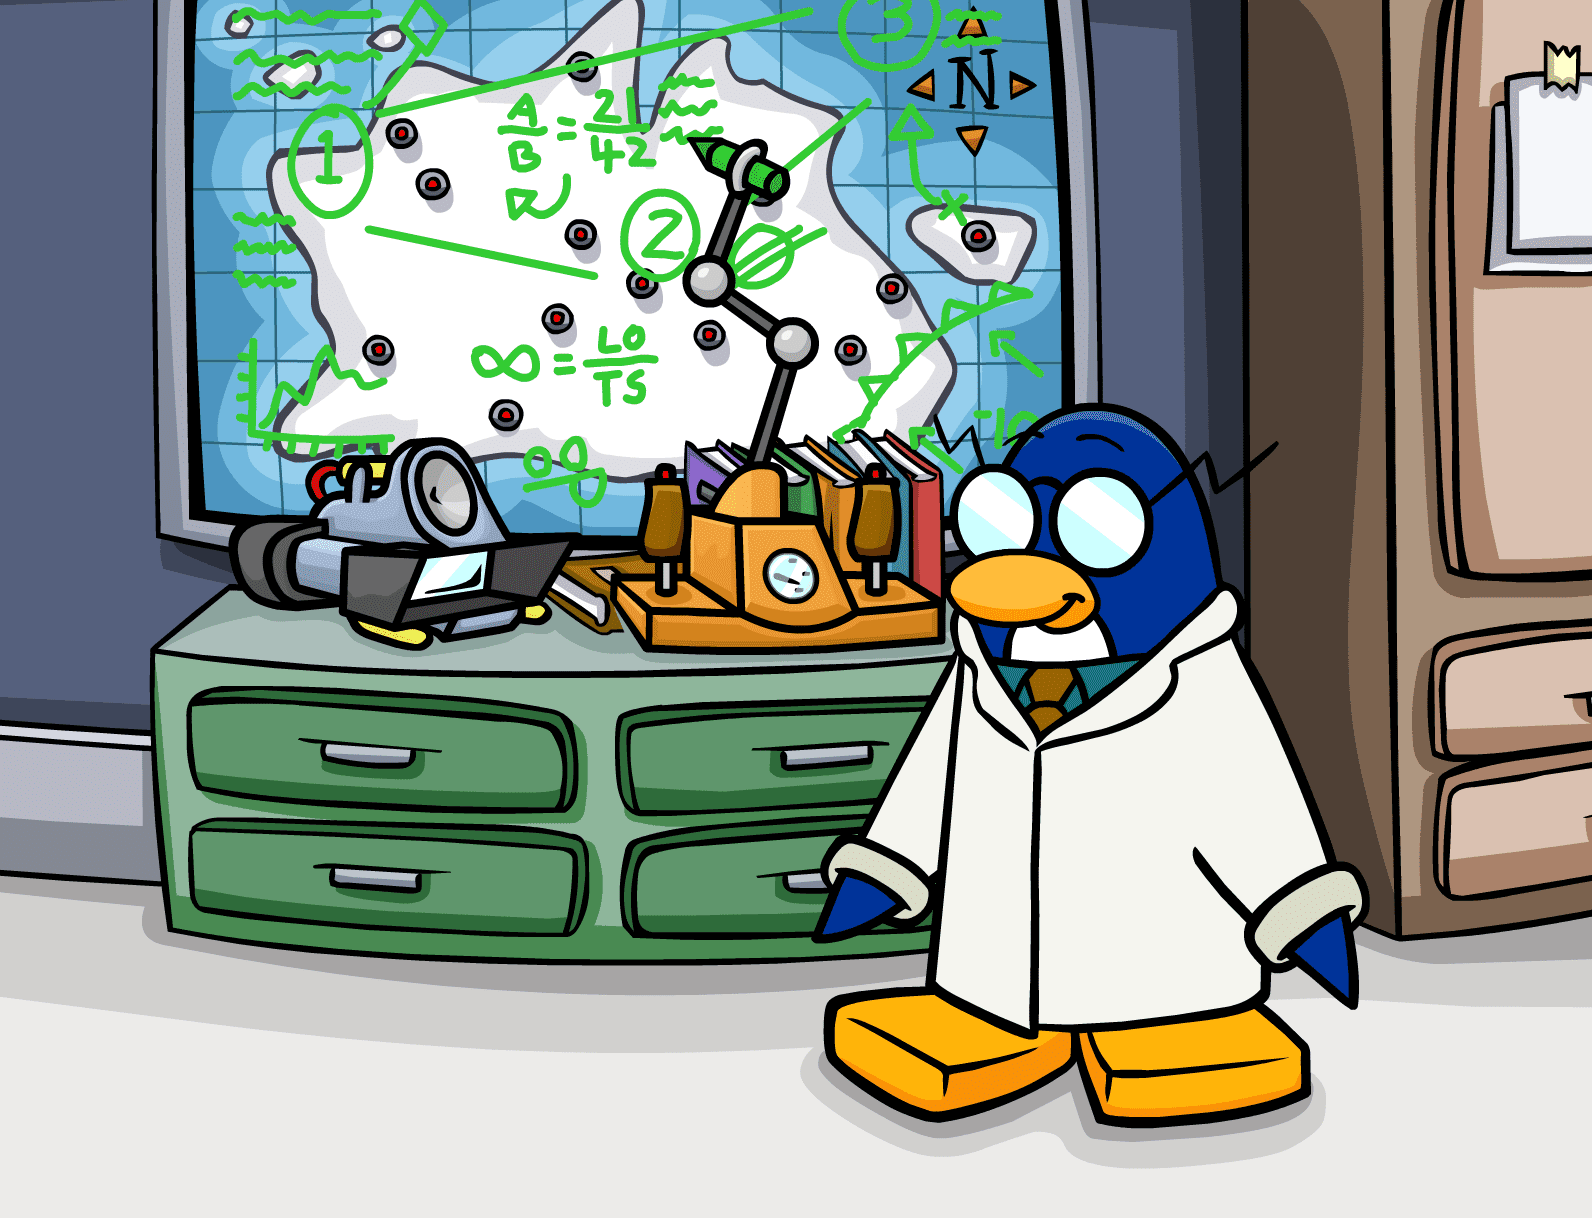 Does anyone else remember those Club Penguin spy missions?